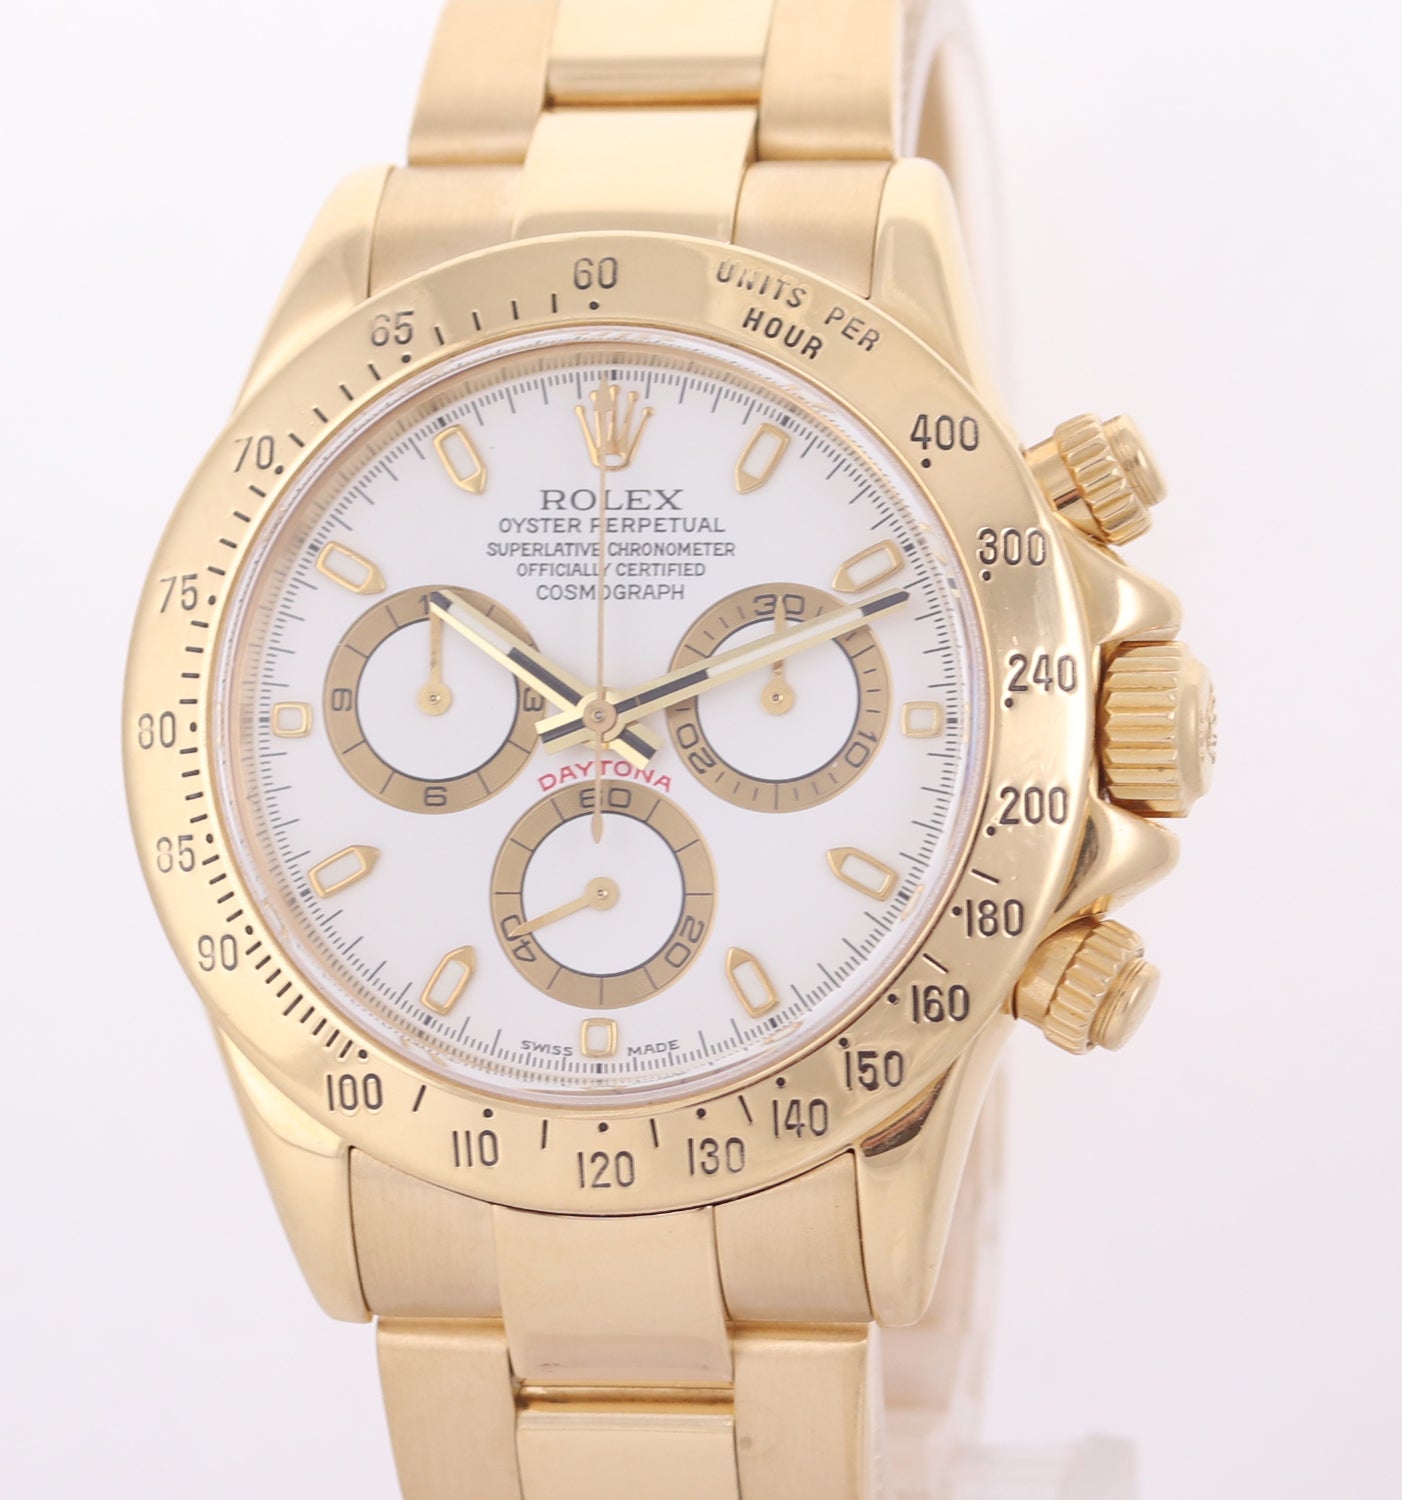 PAPERS Rolex Daytona Cosmo 116528 White Dial 18K Yellow Gold 40mm Watch Box